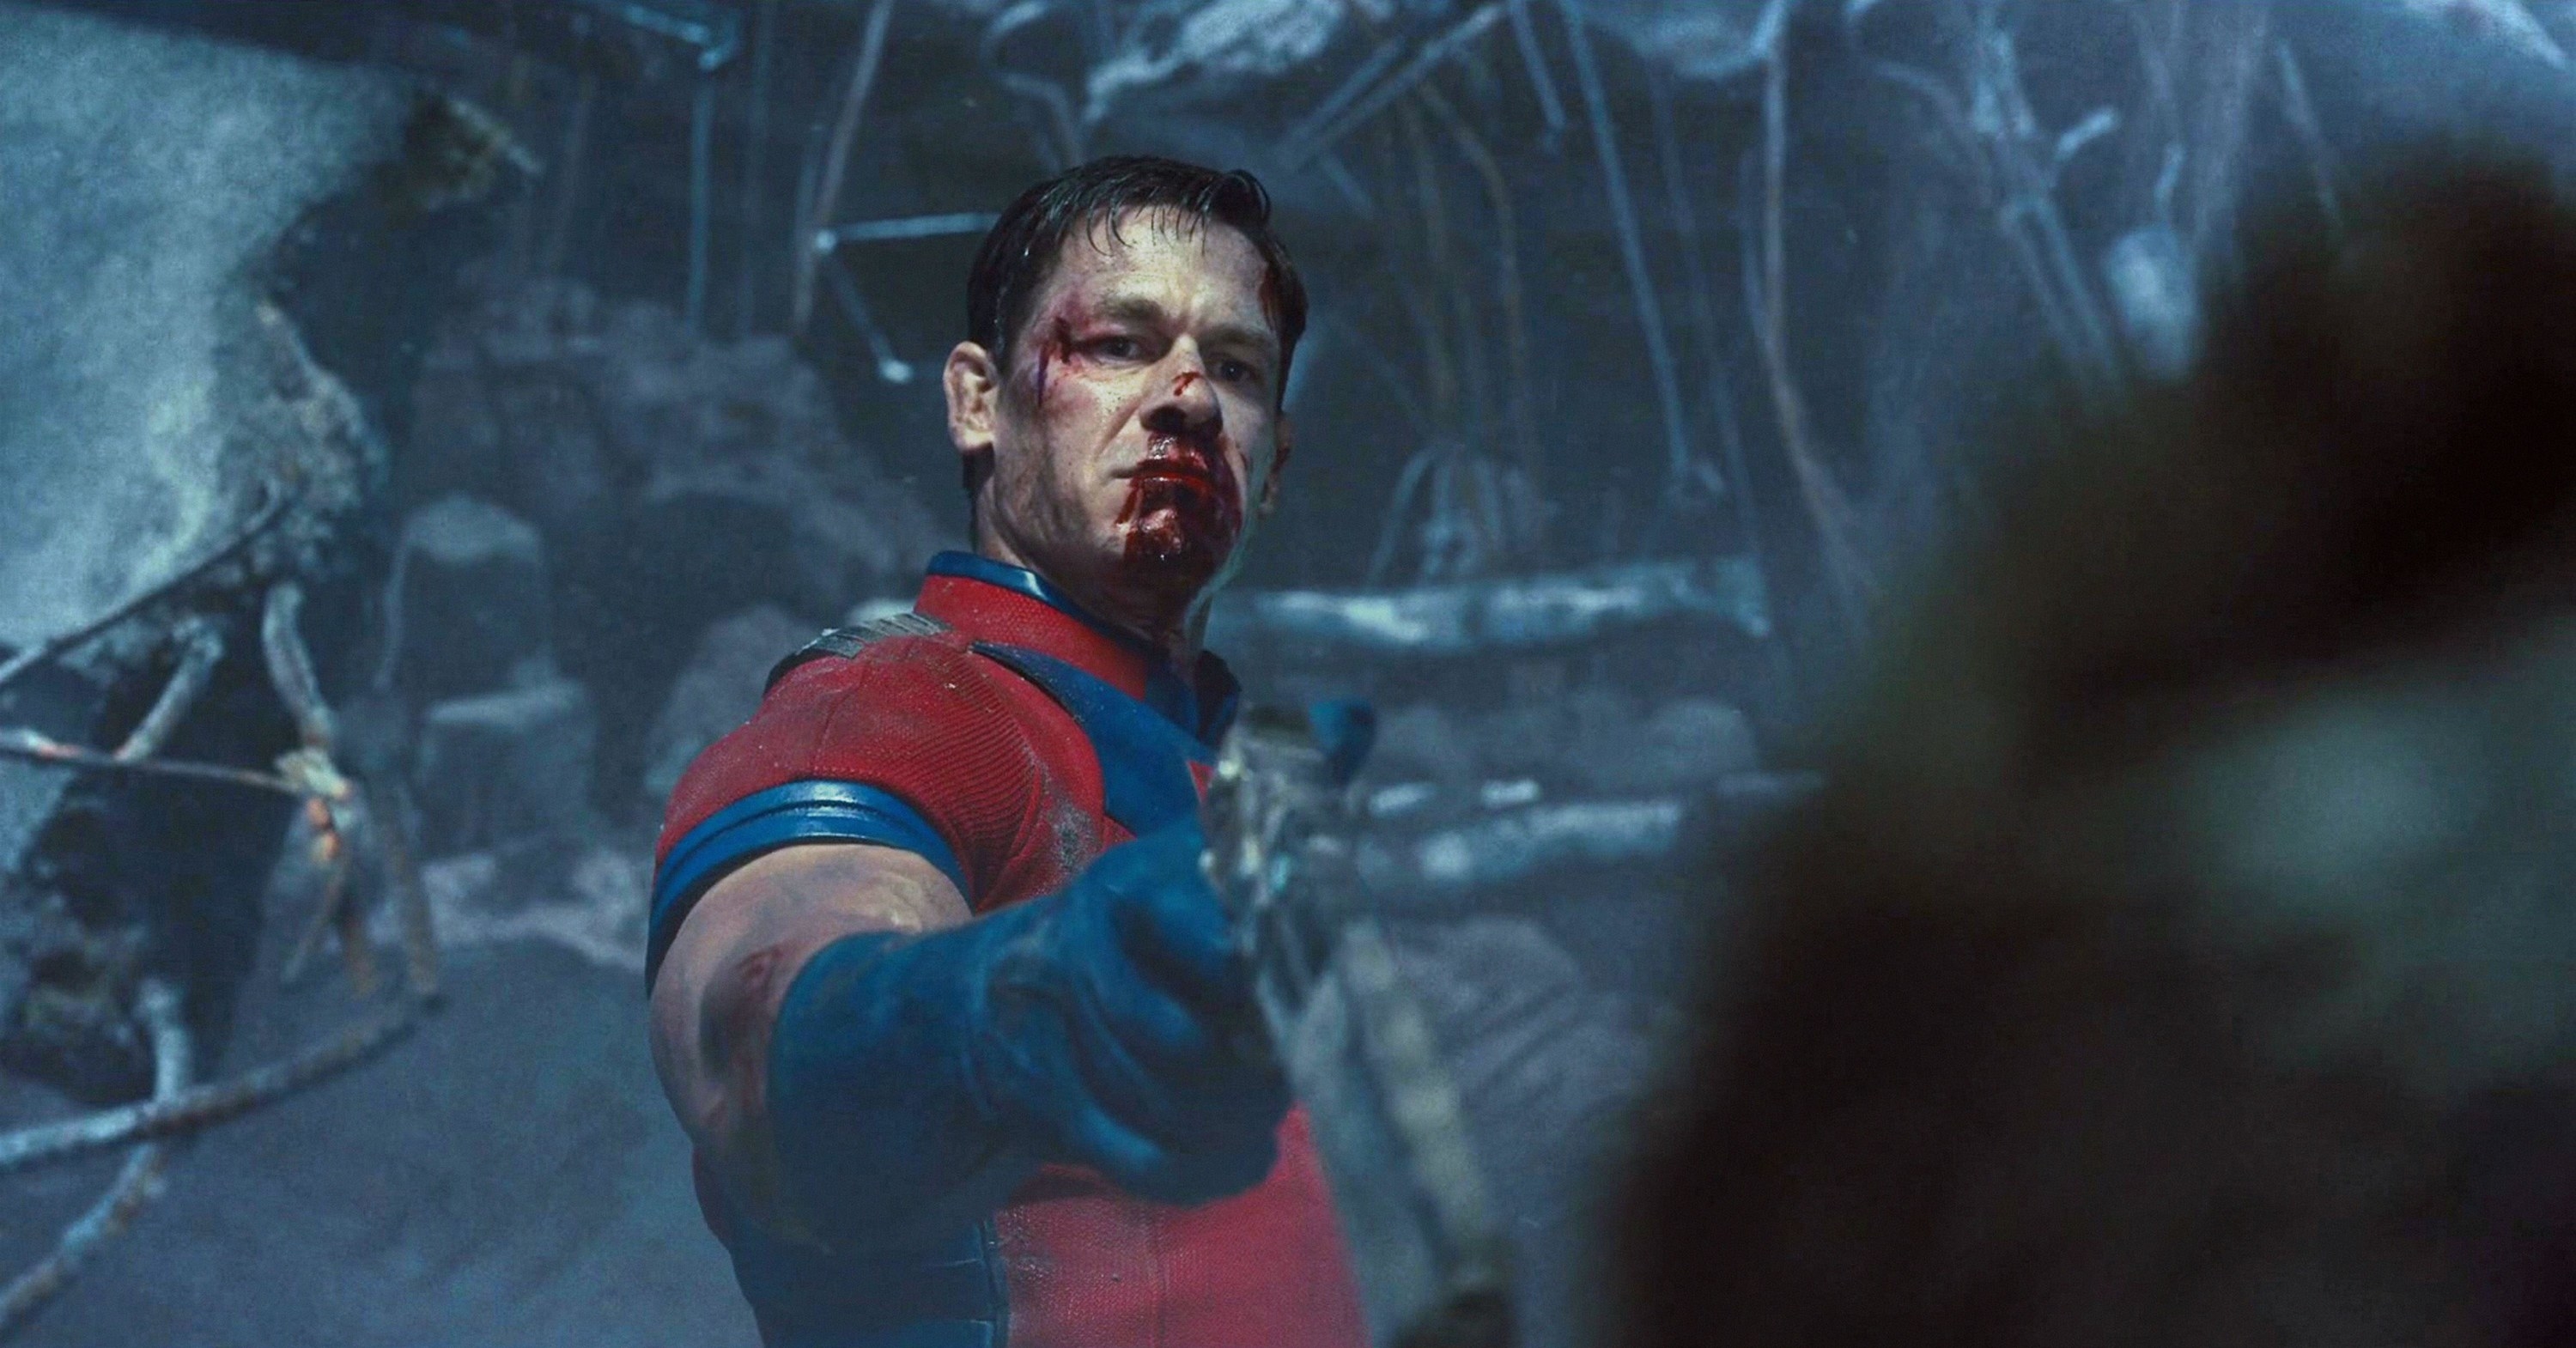 A bloodied man in a red-and-blue costume holds a pistol in the wreckage of a building